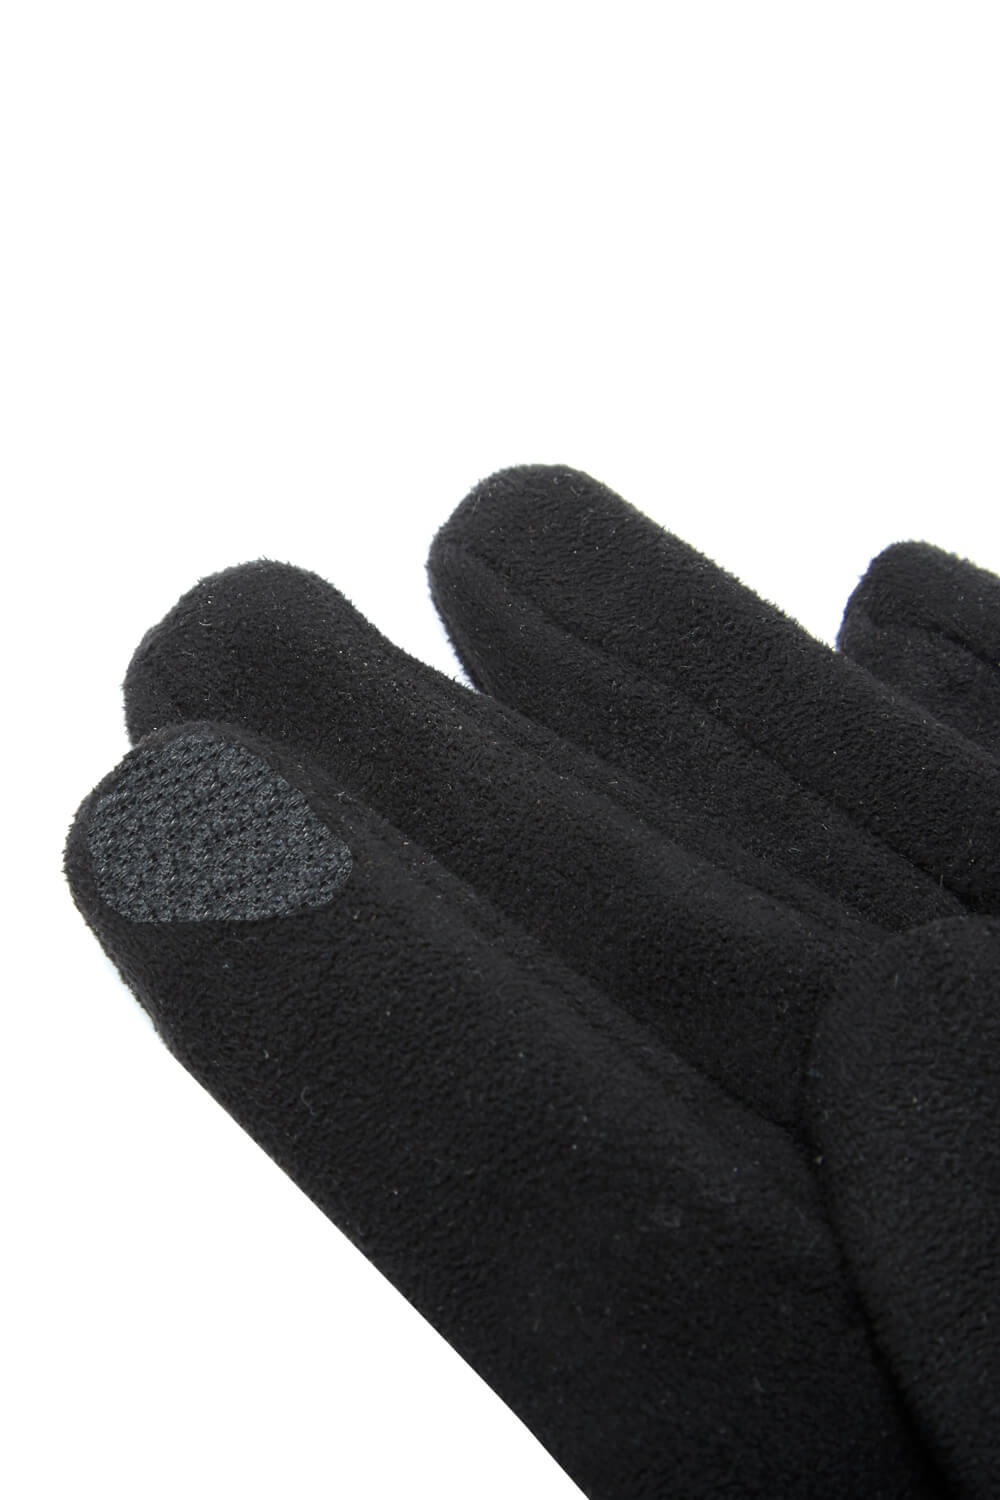 Black Button Detail Gloves, Image 5 of 6